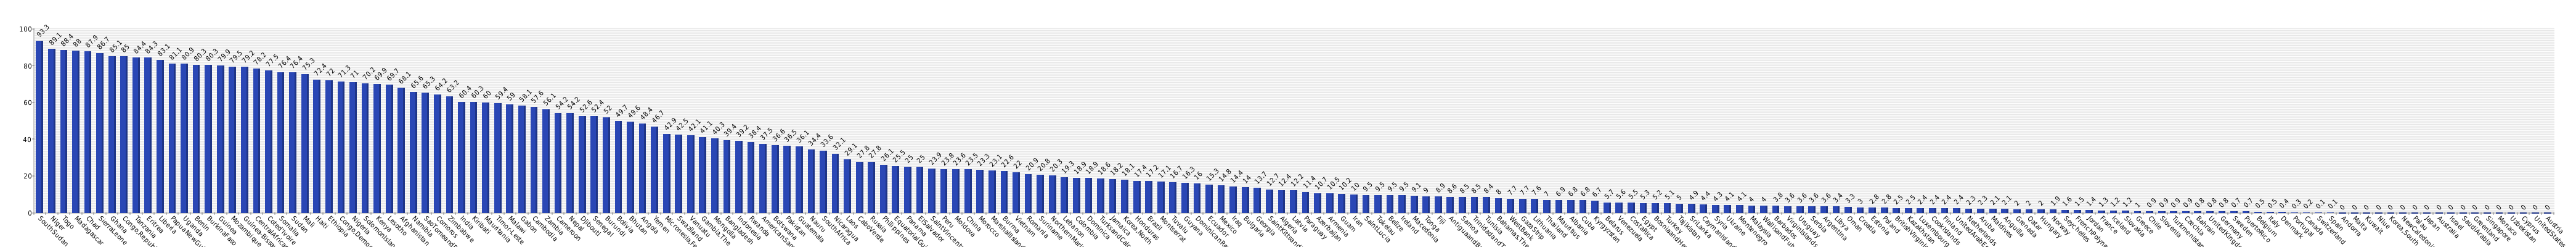 Graph of sanitation facility access - unimproved - total 2018 country comparisons, International rankings